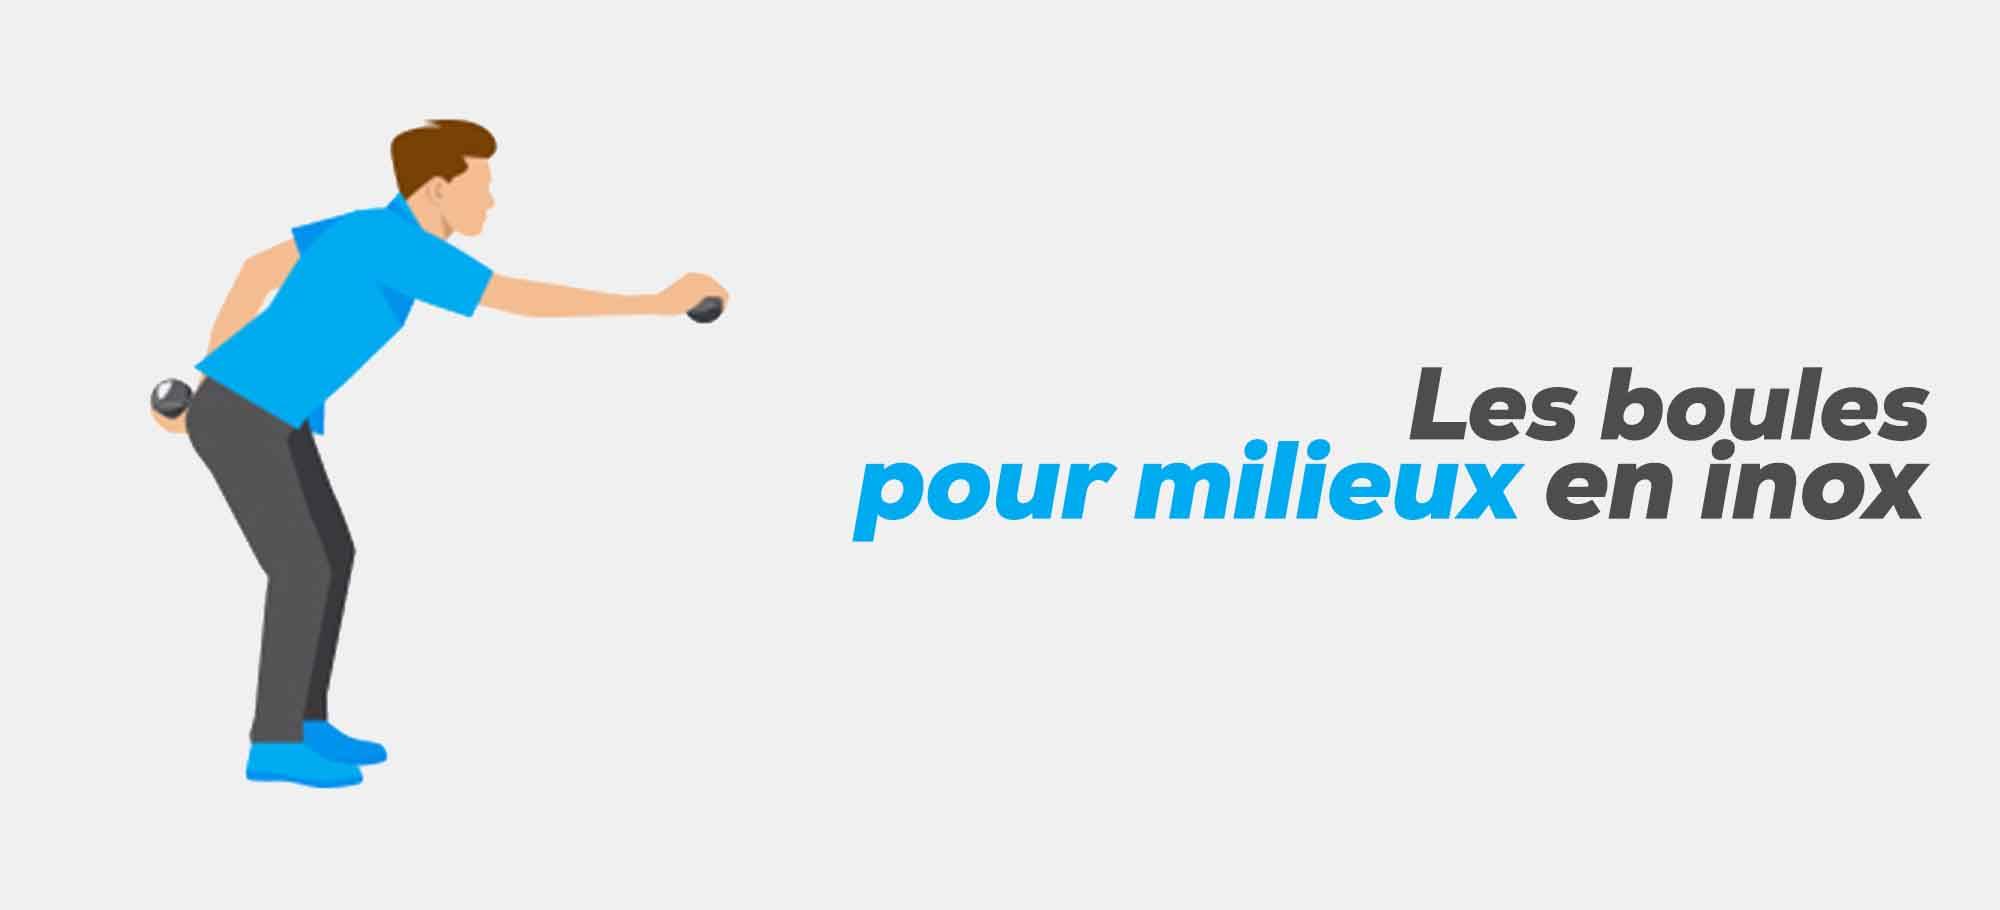 You are currently viewing Les boules pour milieux en inox